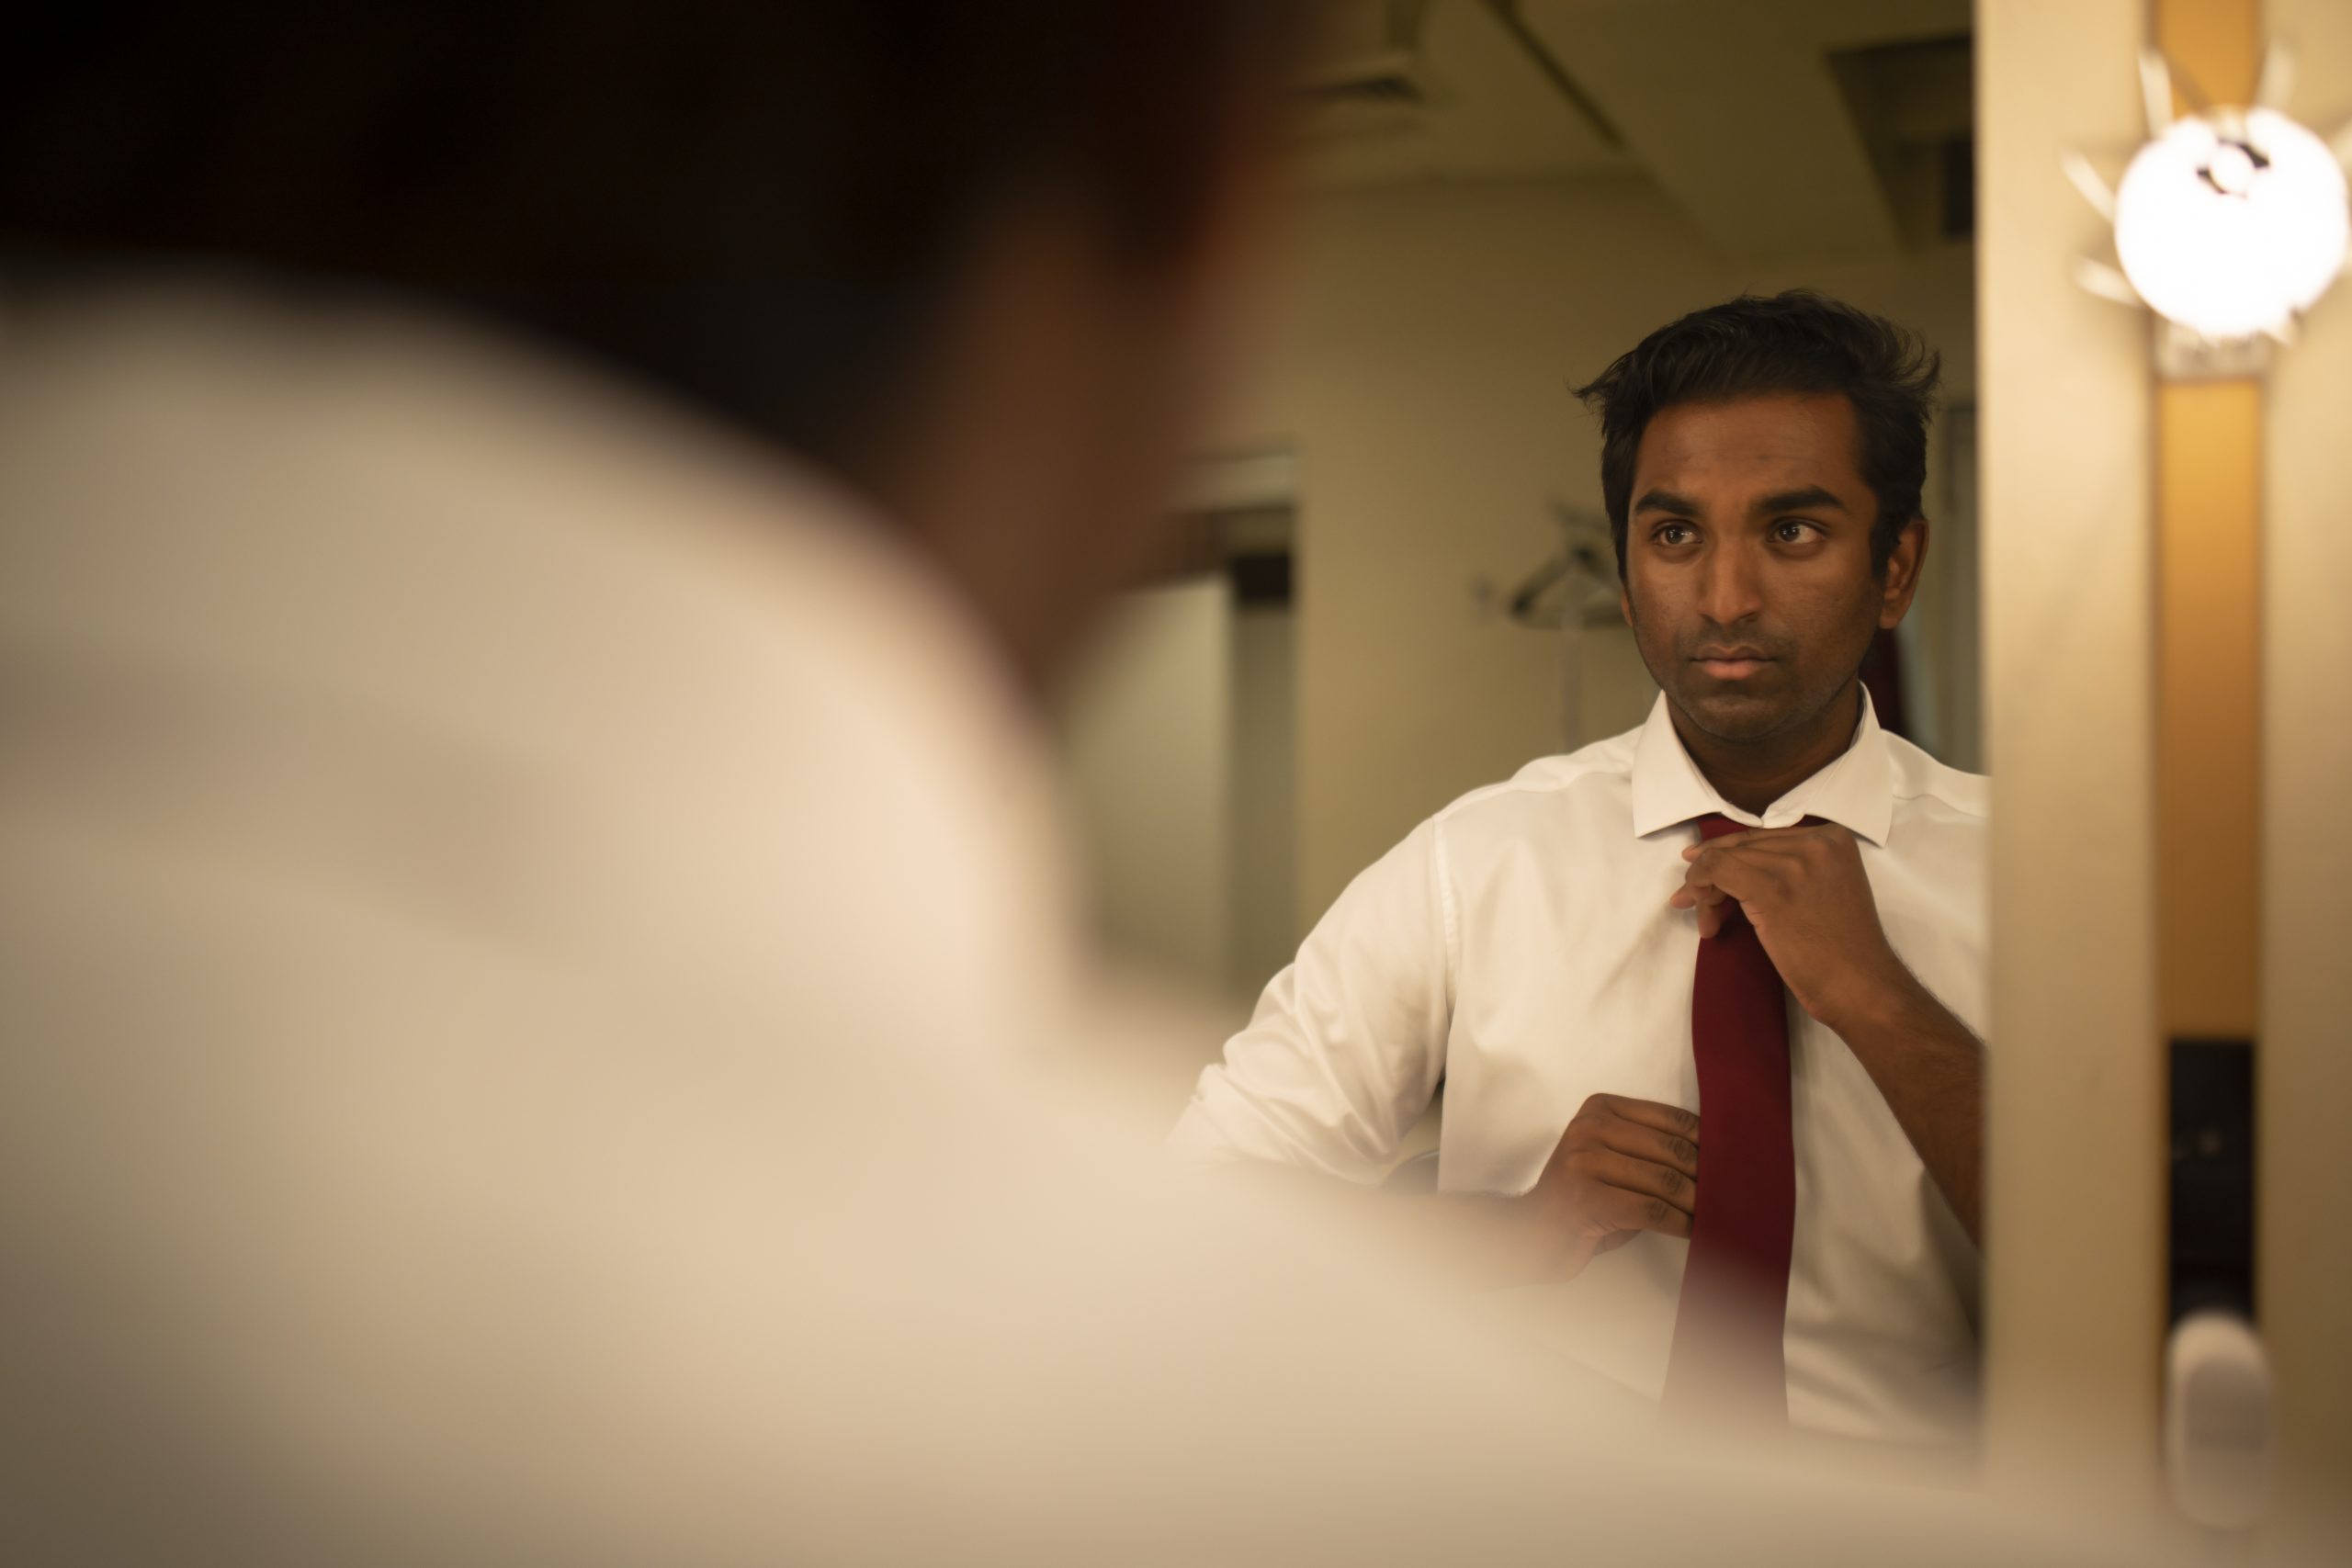 Kavin fixes his tie in his mirror backstage before the show.